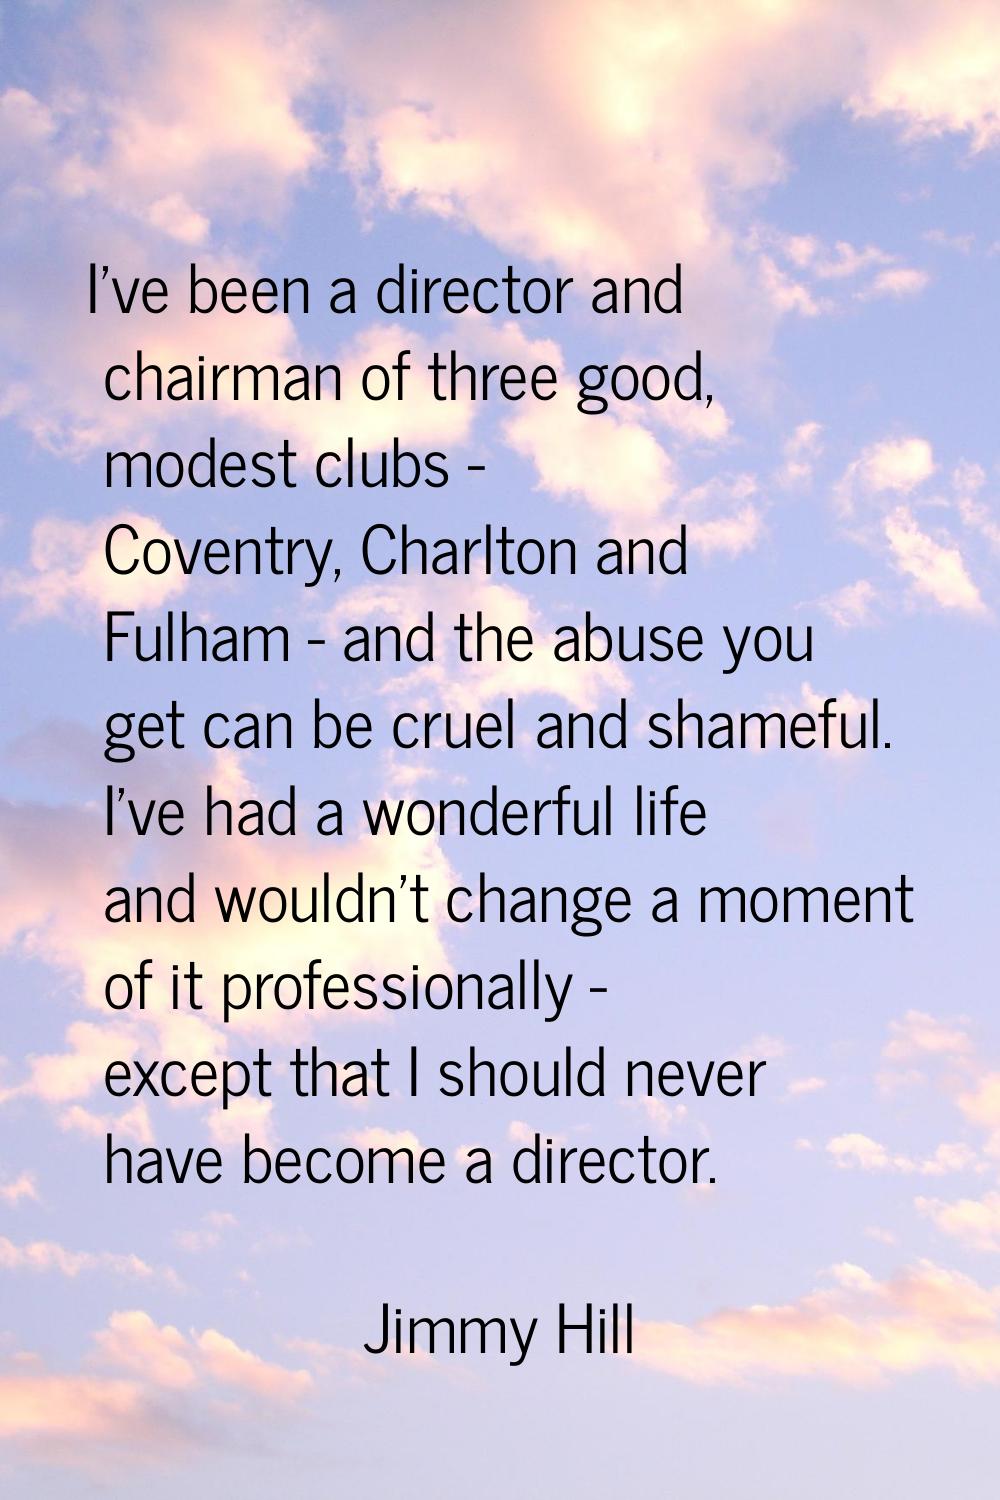 I've been a director and chairman of three good, modest clubs - Coventry, Charlton and Fulham - and